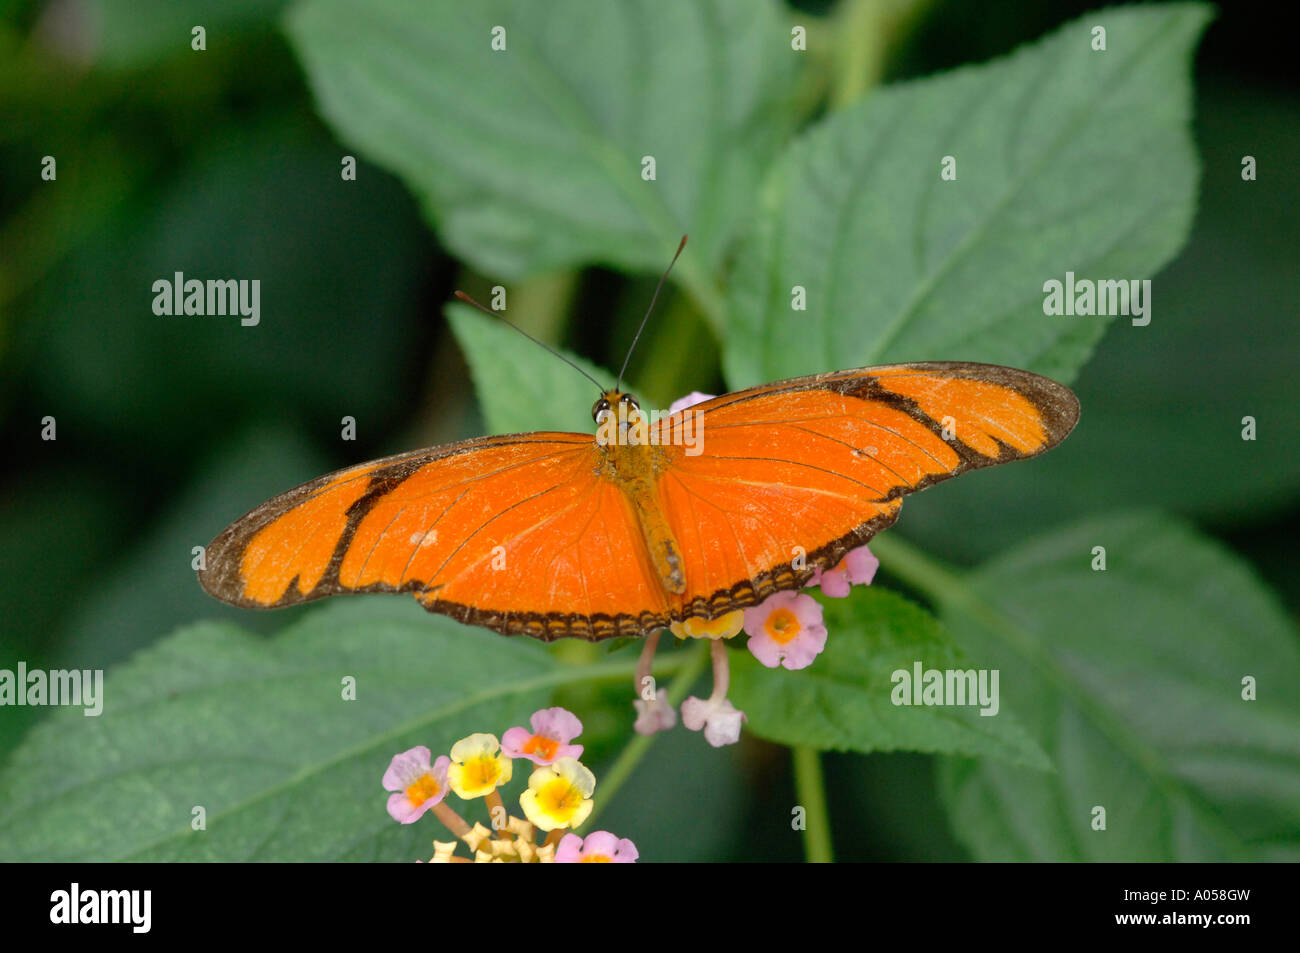 The Flame butterfly Dryas julia Heliconidae Costa Rica Stock Photo